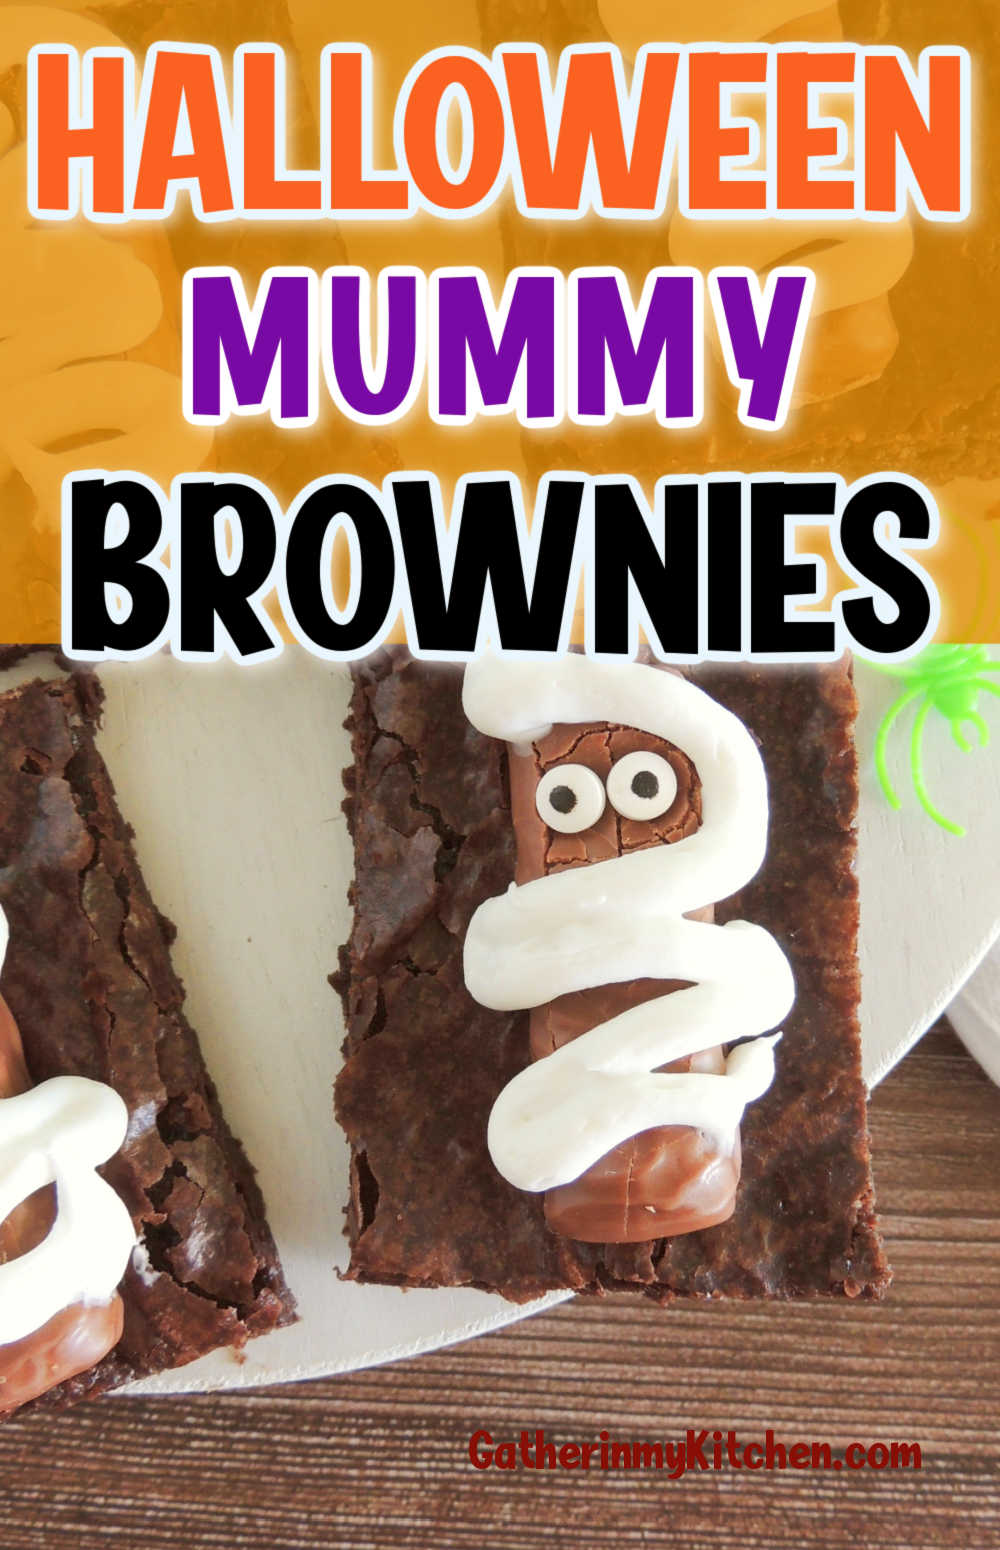 pin image: top says "Halloween Mummy Brownies" and background is an image of a mummy brownie.